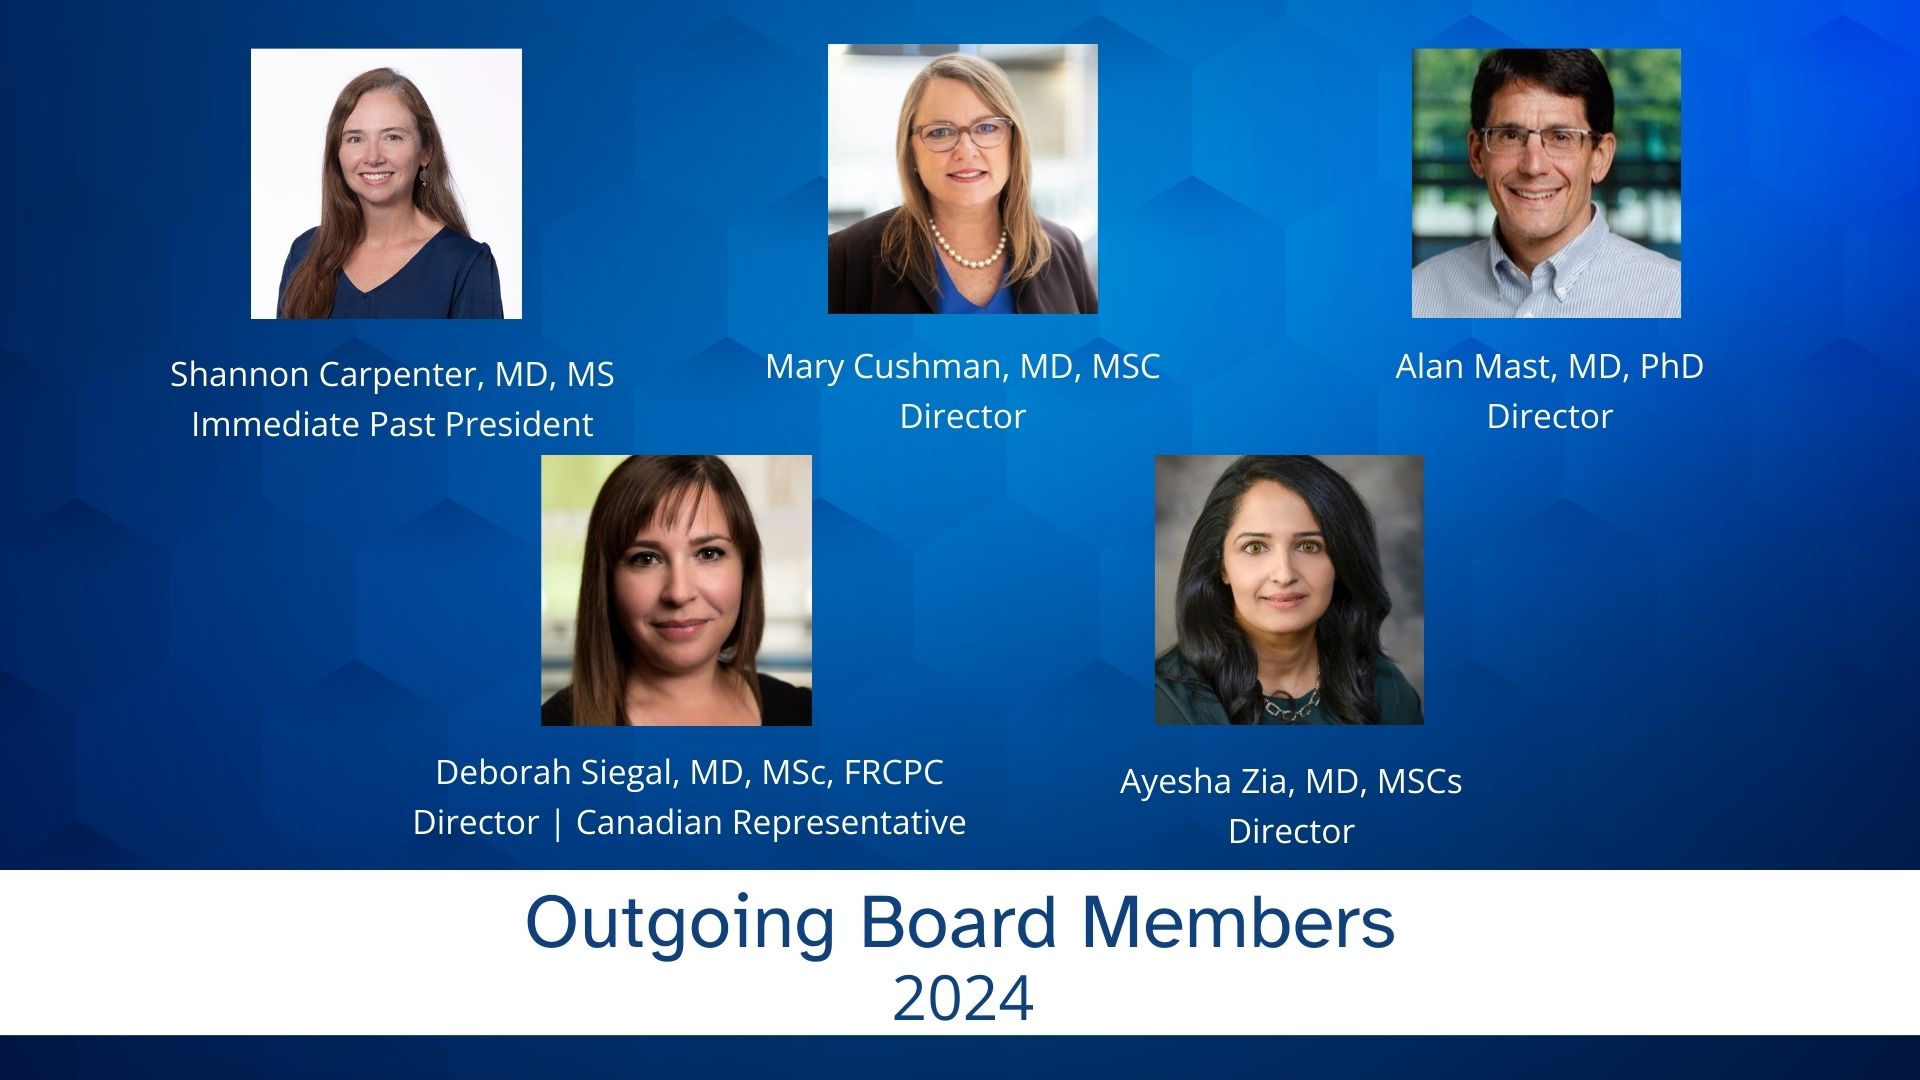 Outgoing Board Members 2024